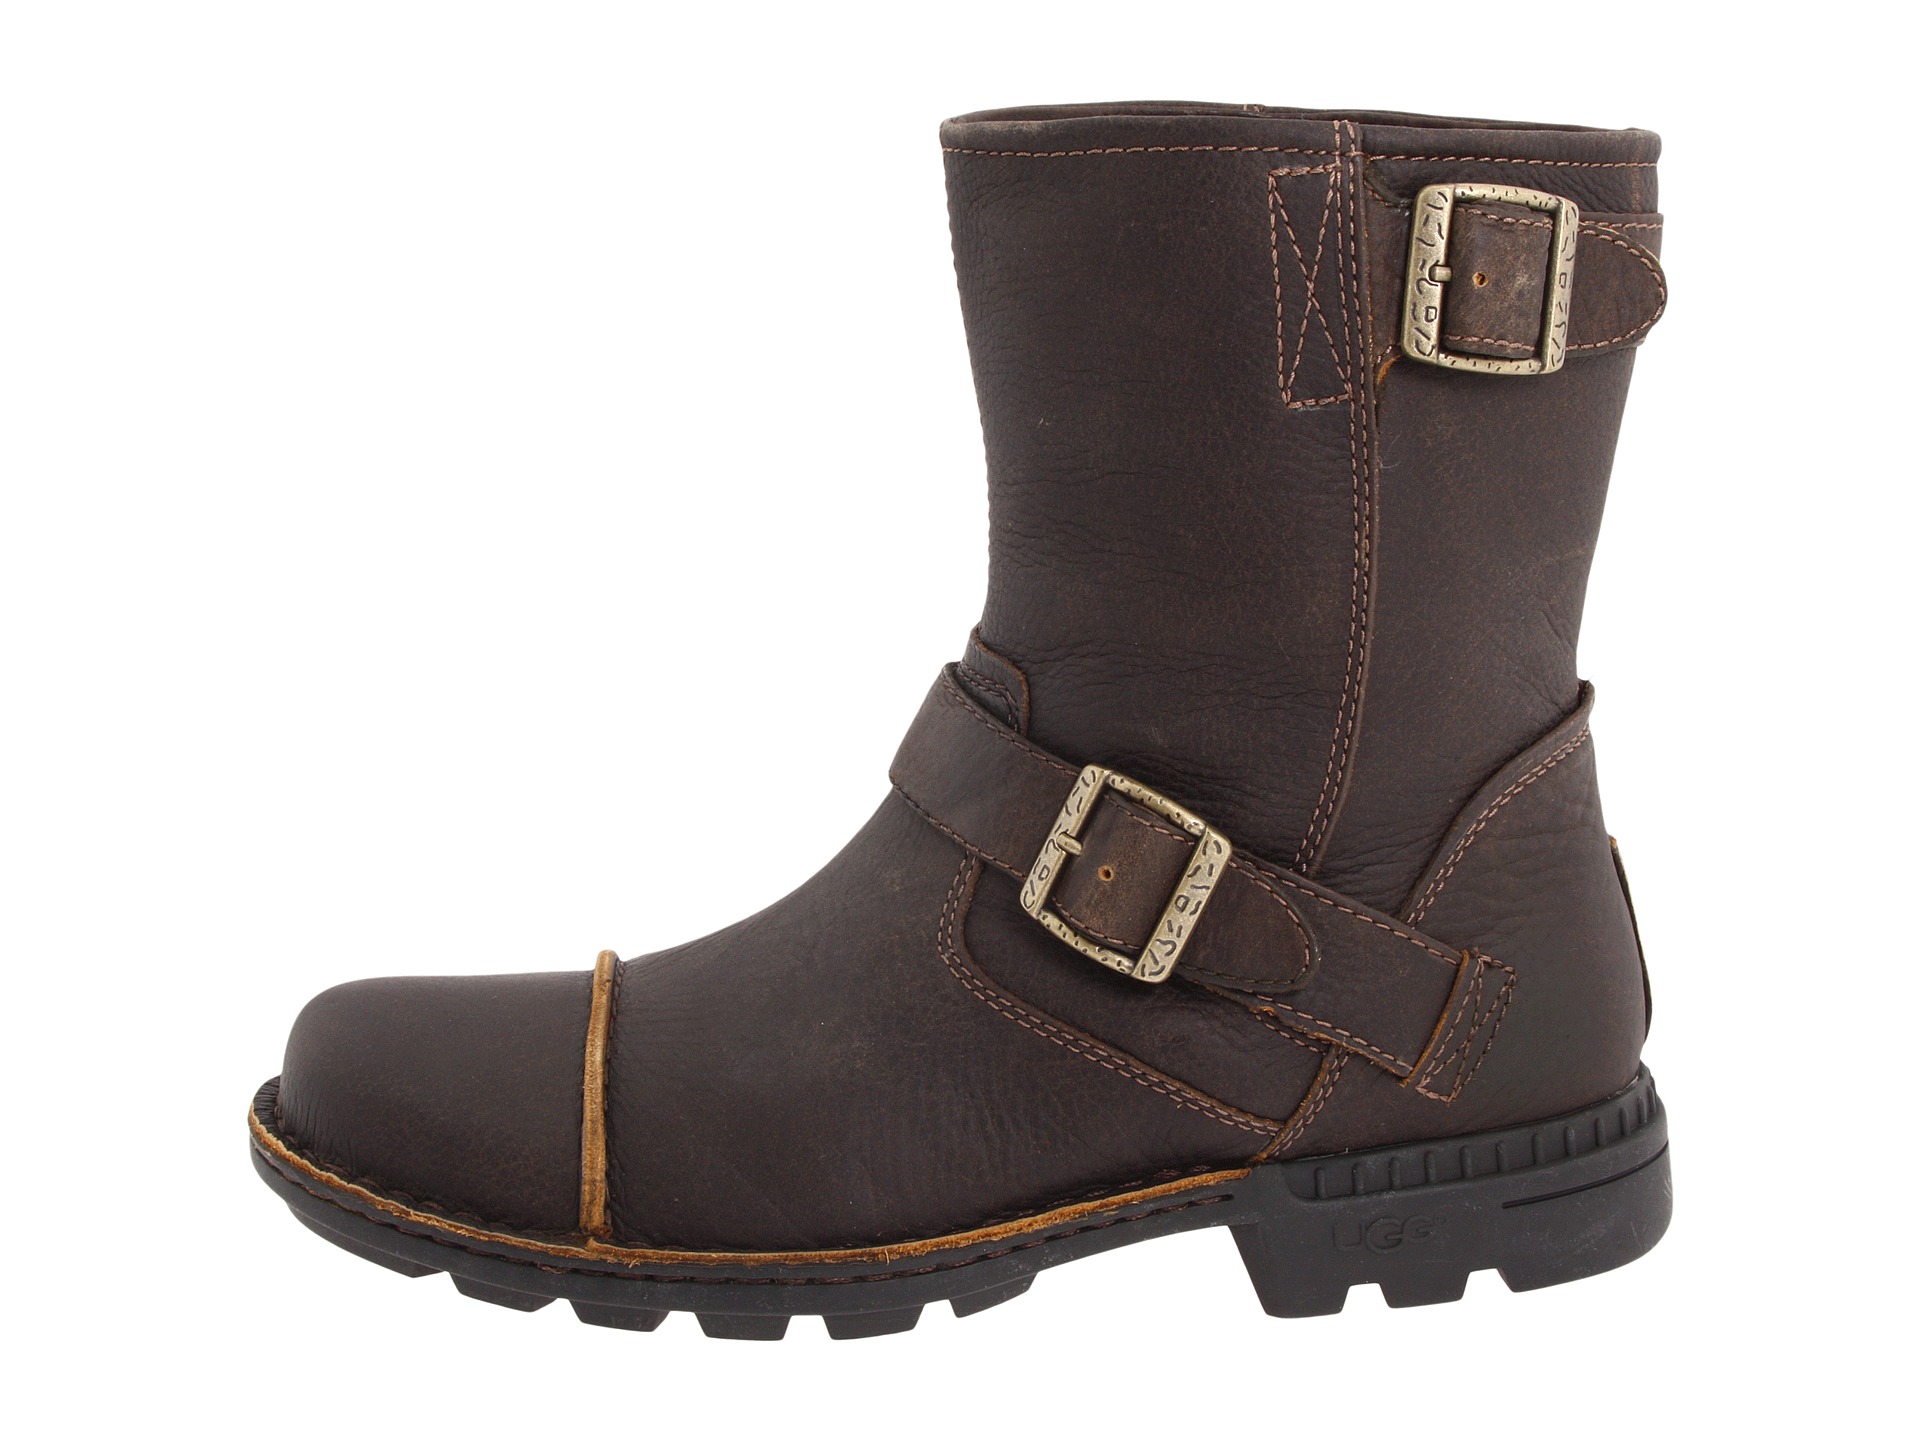 Ugg Rockville Ii Dune Leather, Shoes | Shipped Free at Zappos